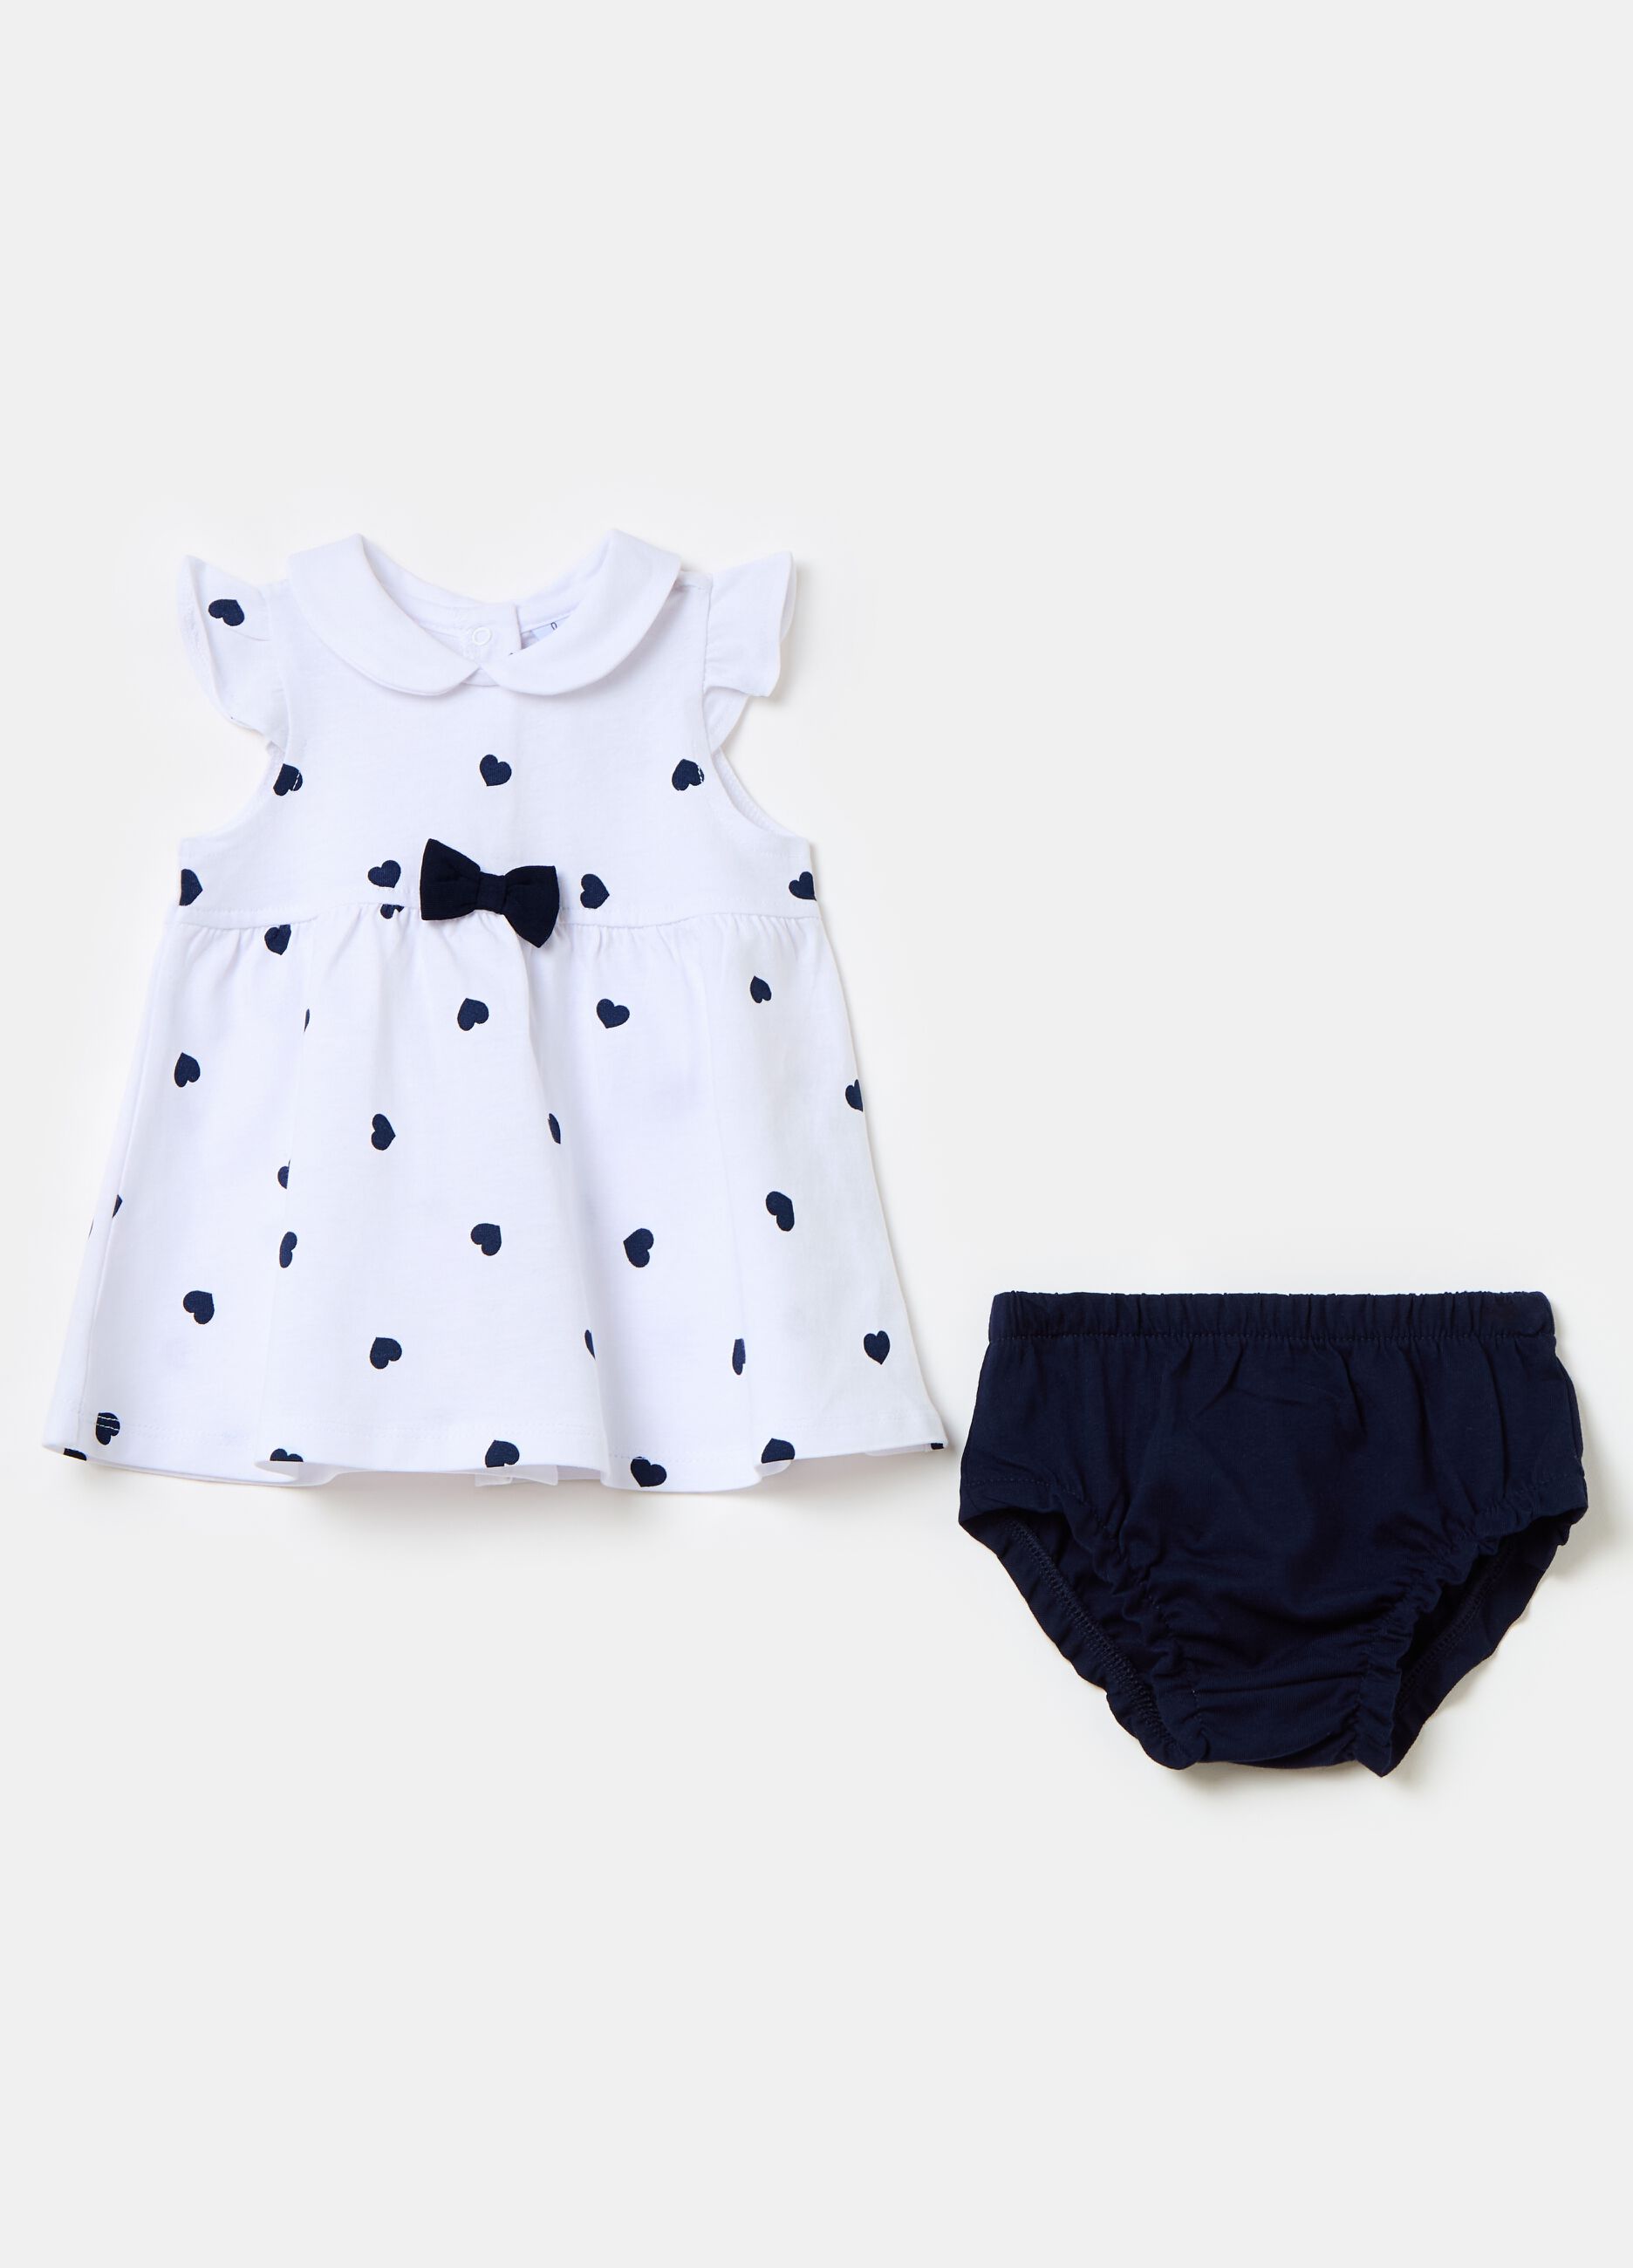 Organic cotton dress and French knickers set